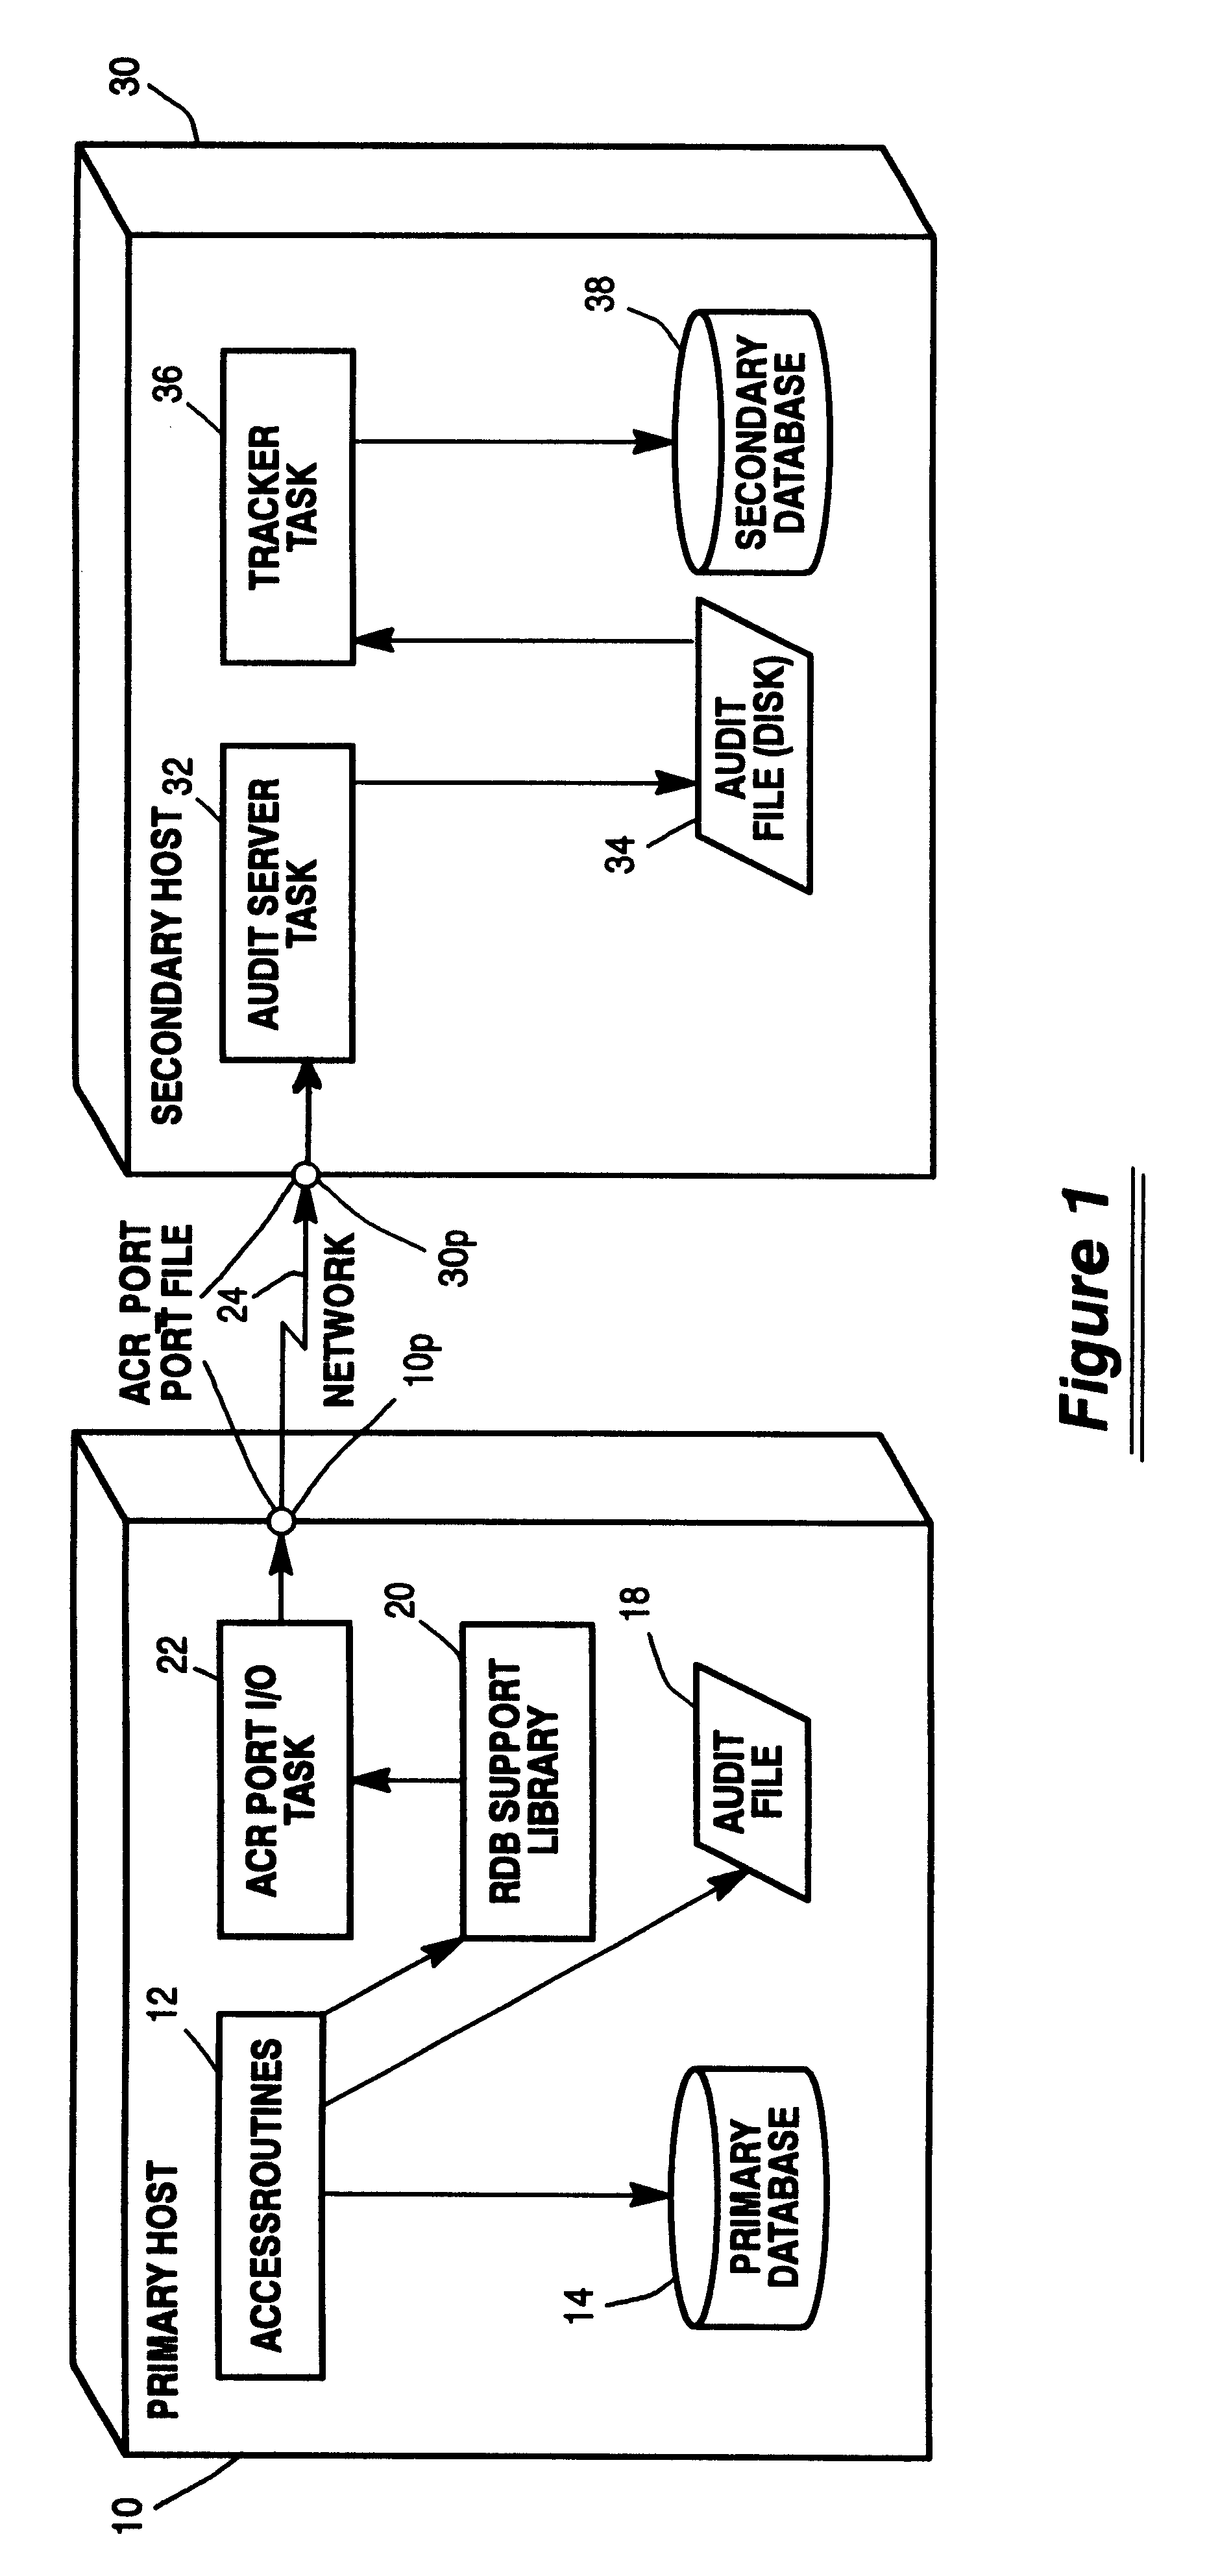 Tracker sensing method for regulating synchronization of audit files between primary and secondary hosts